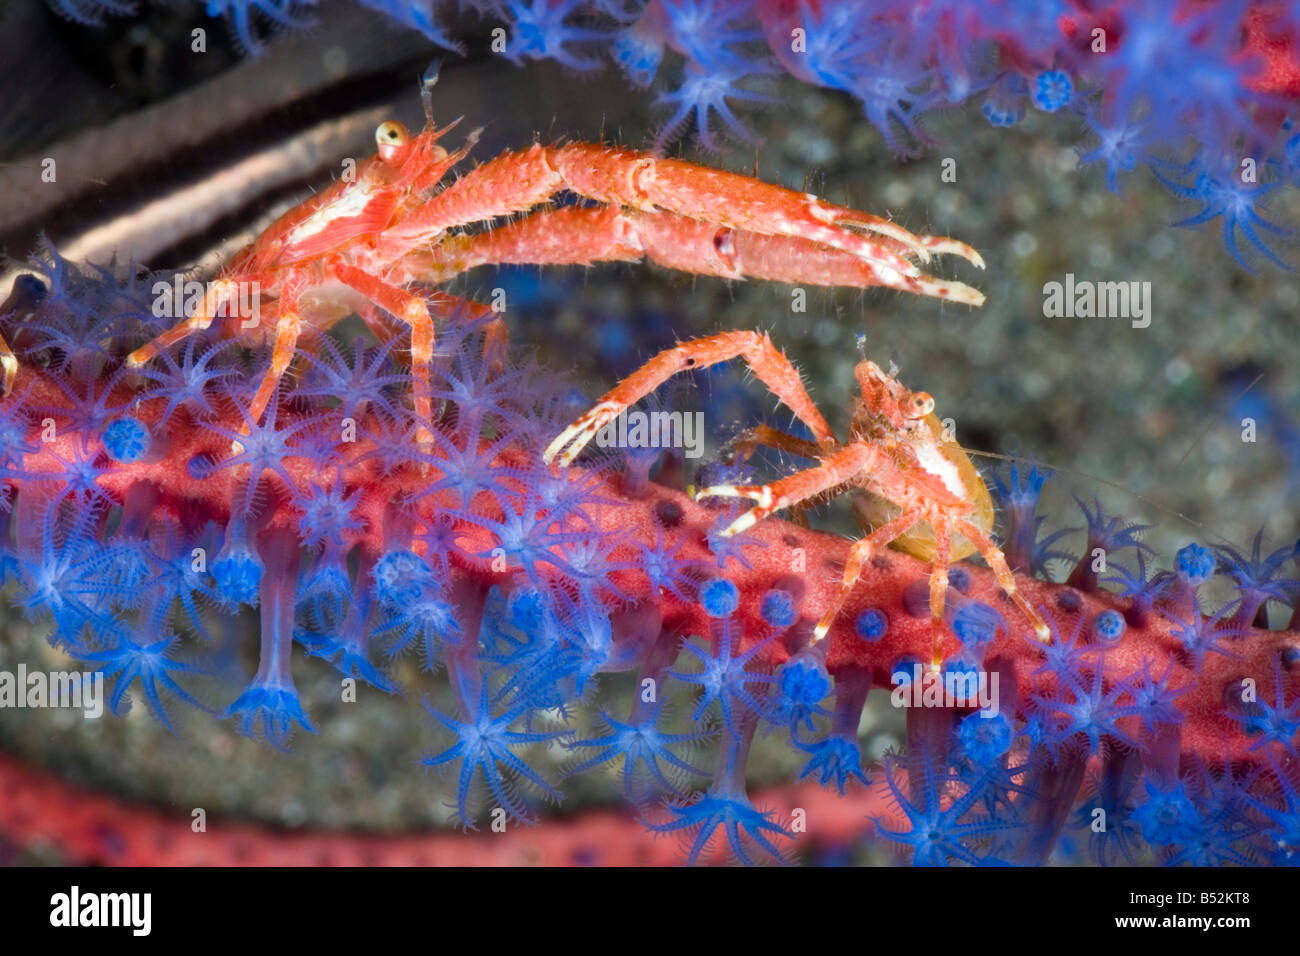 A pair of squat lobsters, Galathea sp, photographed at night on gorgonian coral, Komodo, Indonesia. Stock Photo